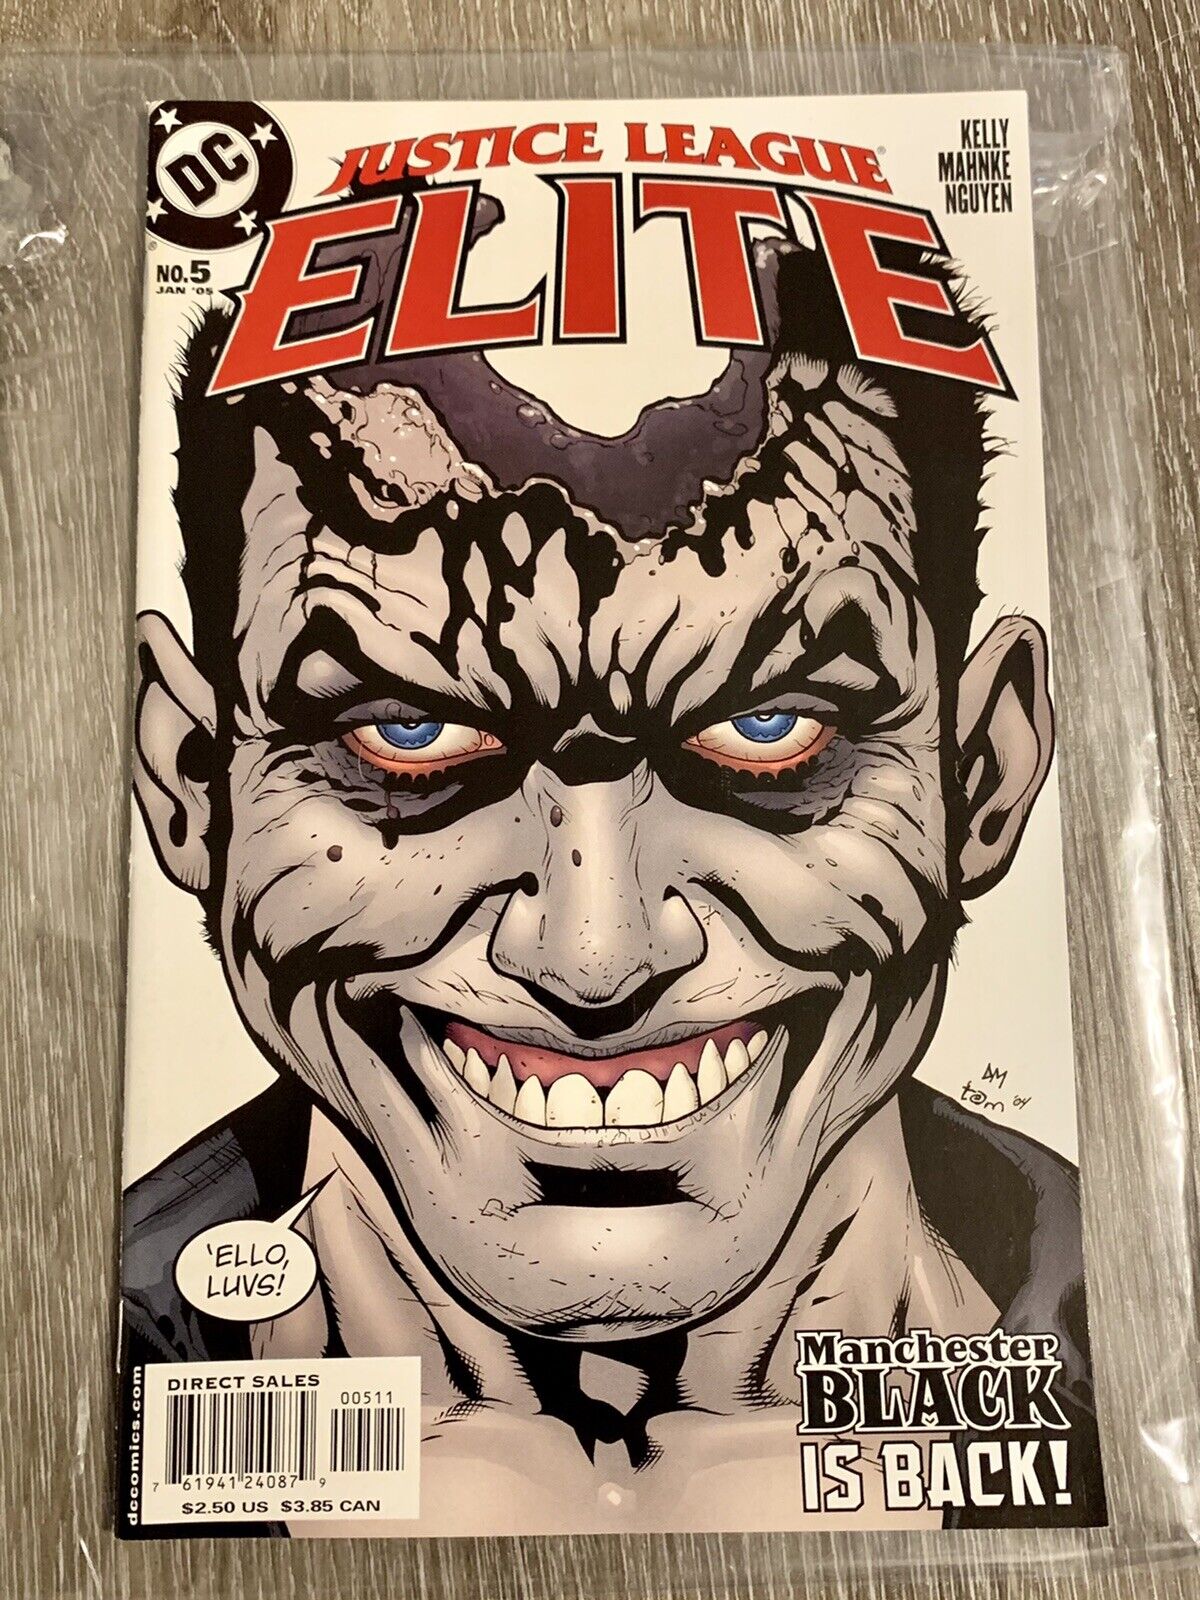 Justice League Elite #5 DC Comics Book First Printing VF+ Bagged Boarded 